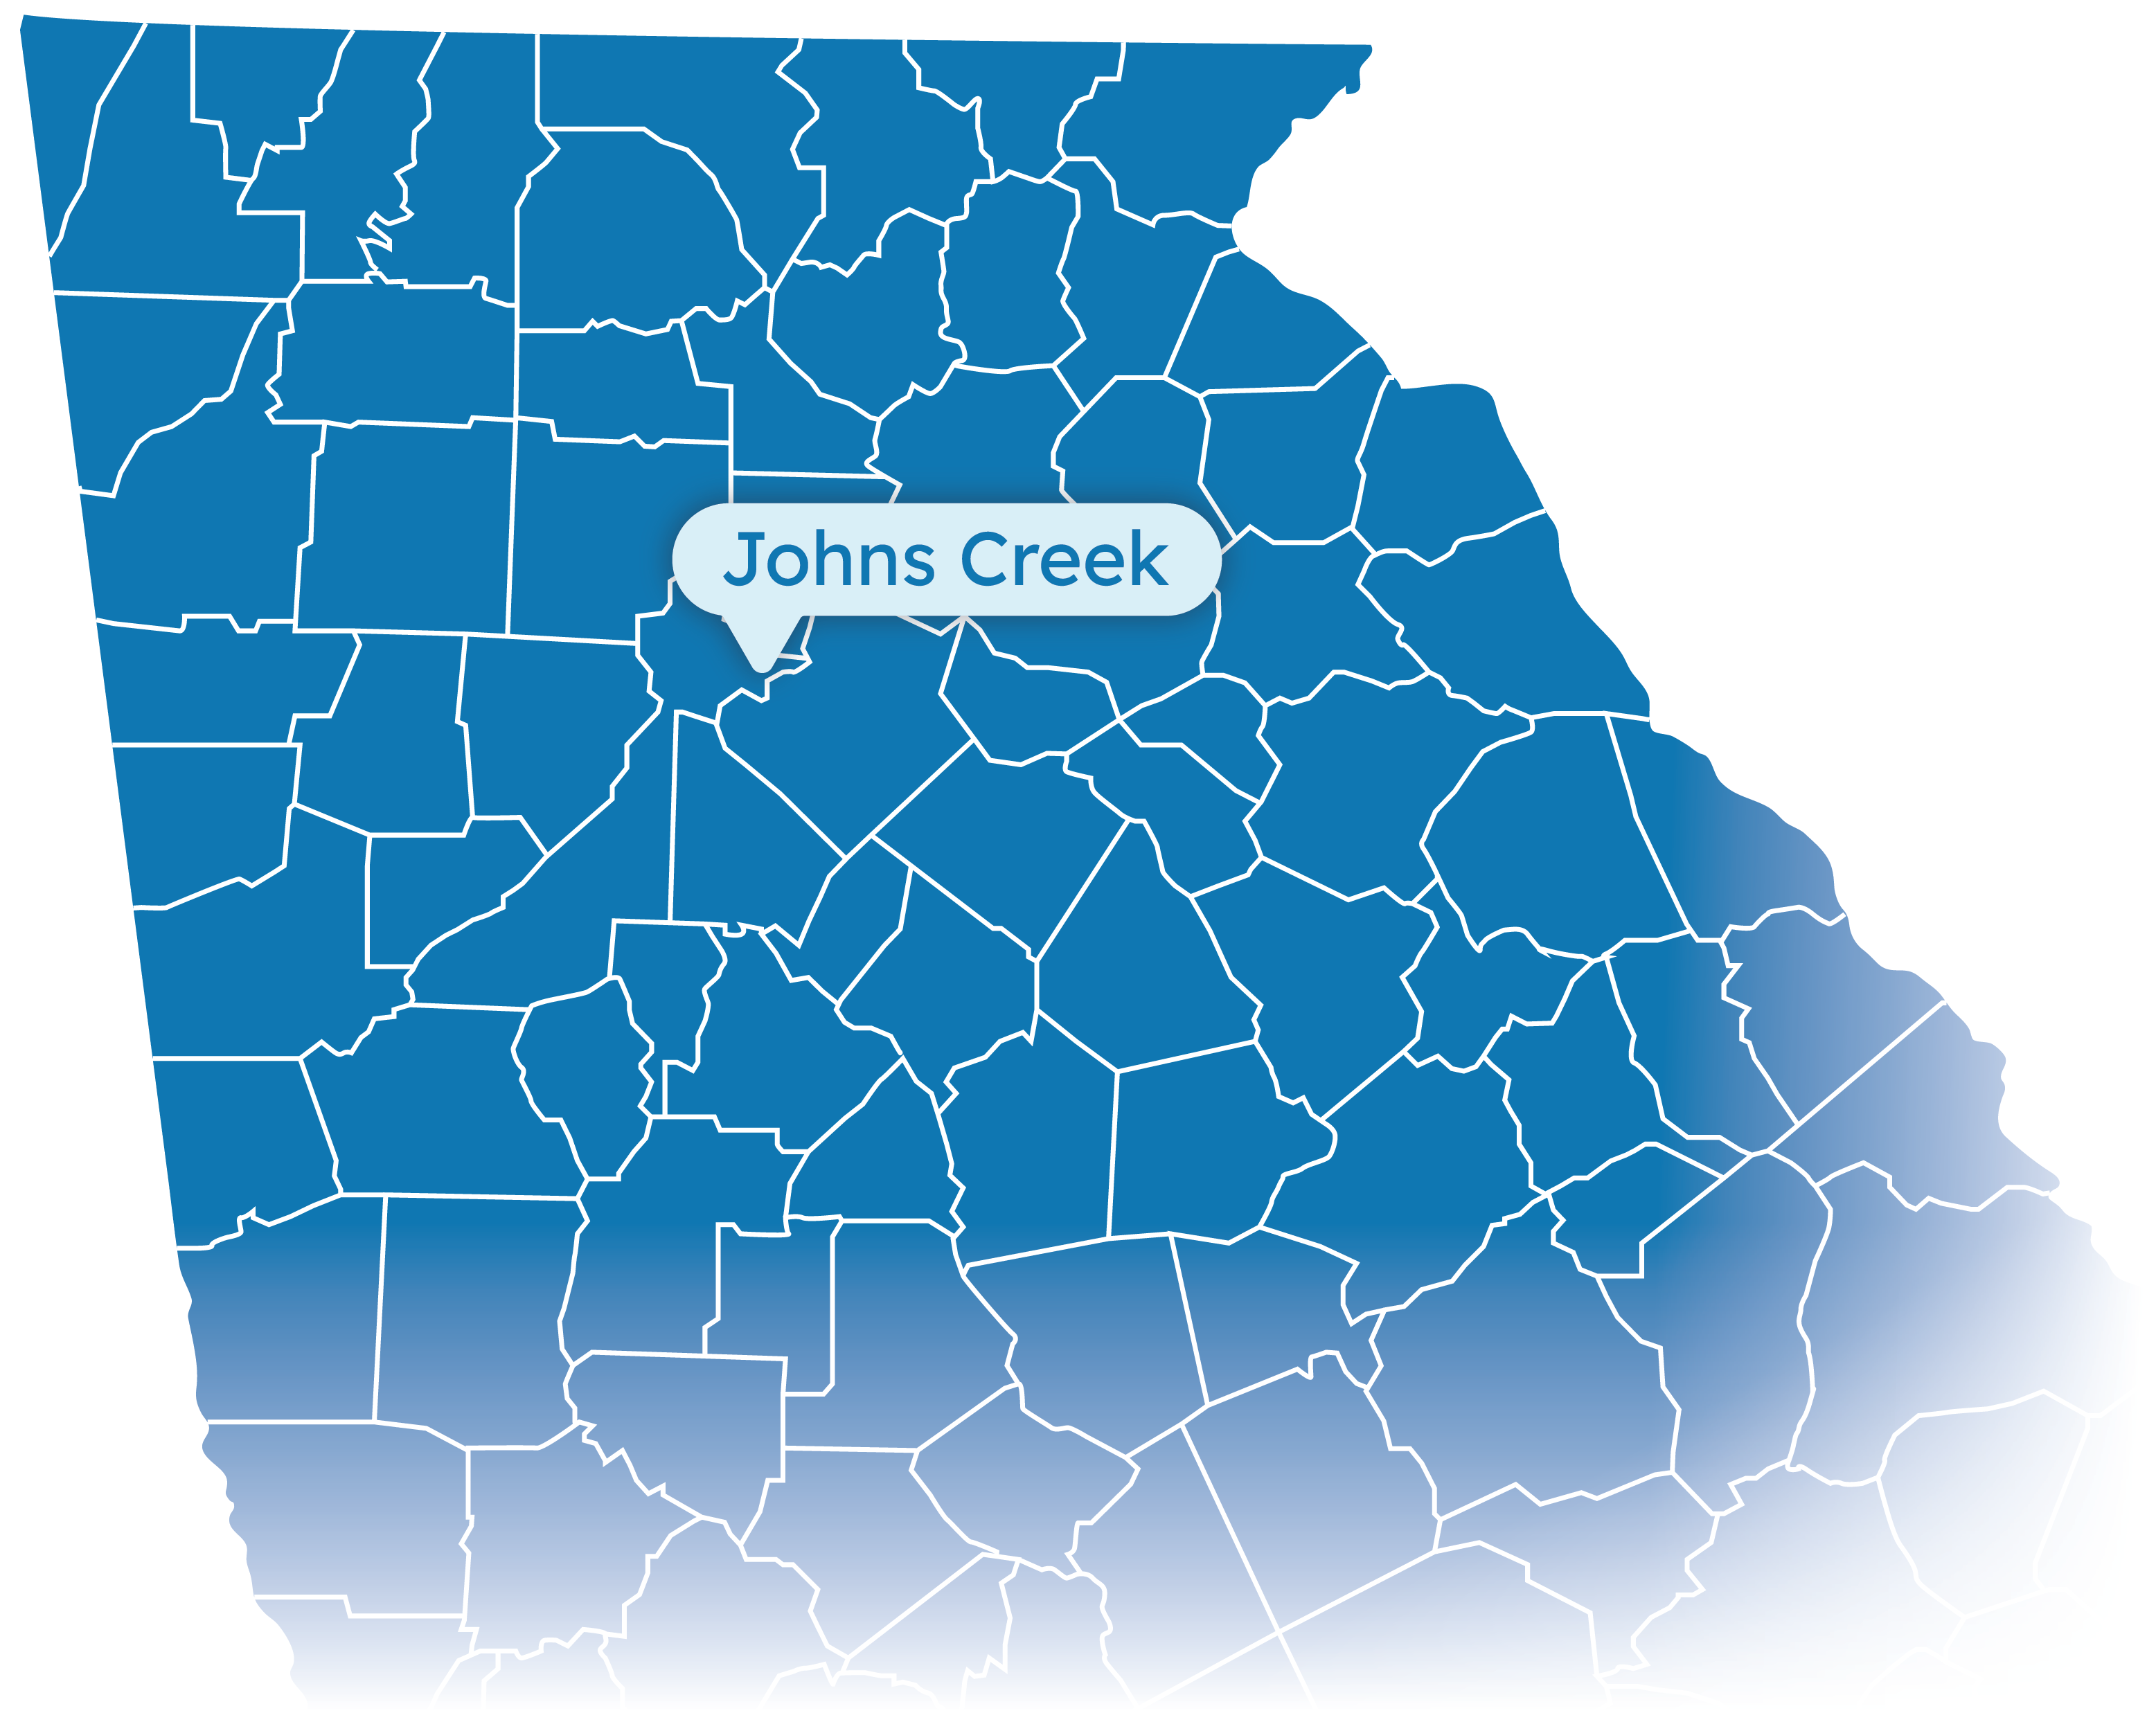 Map of Georgia with Johns Creek highlighted